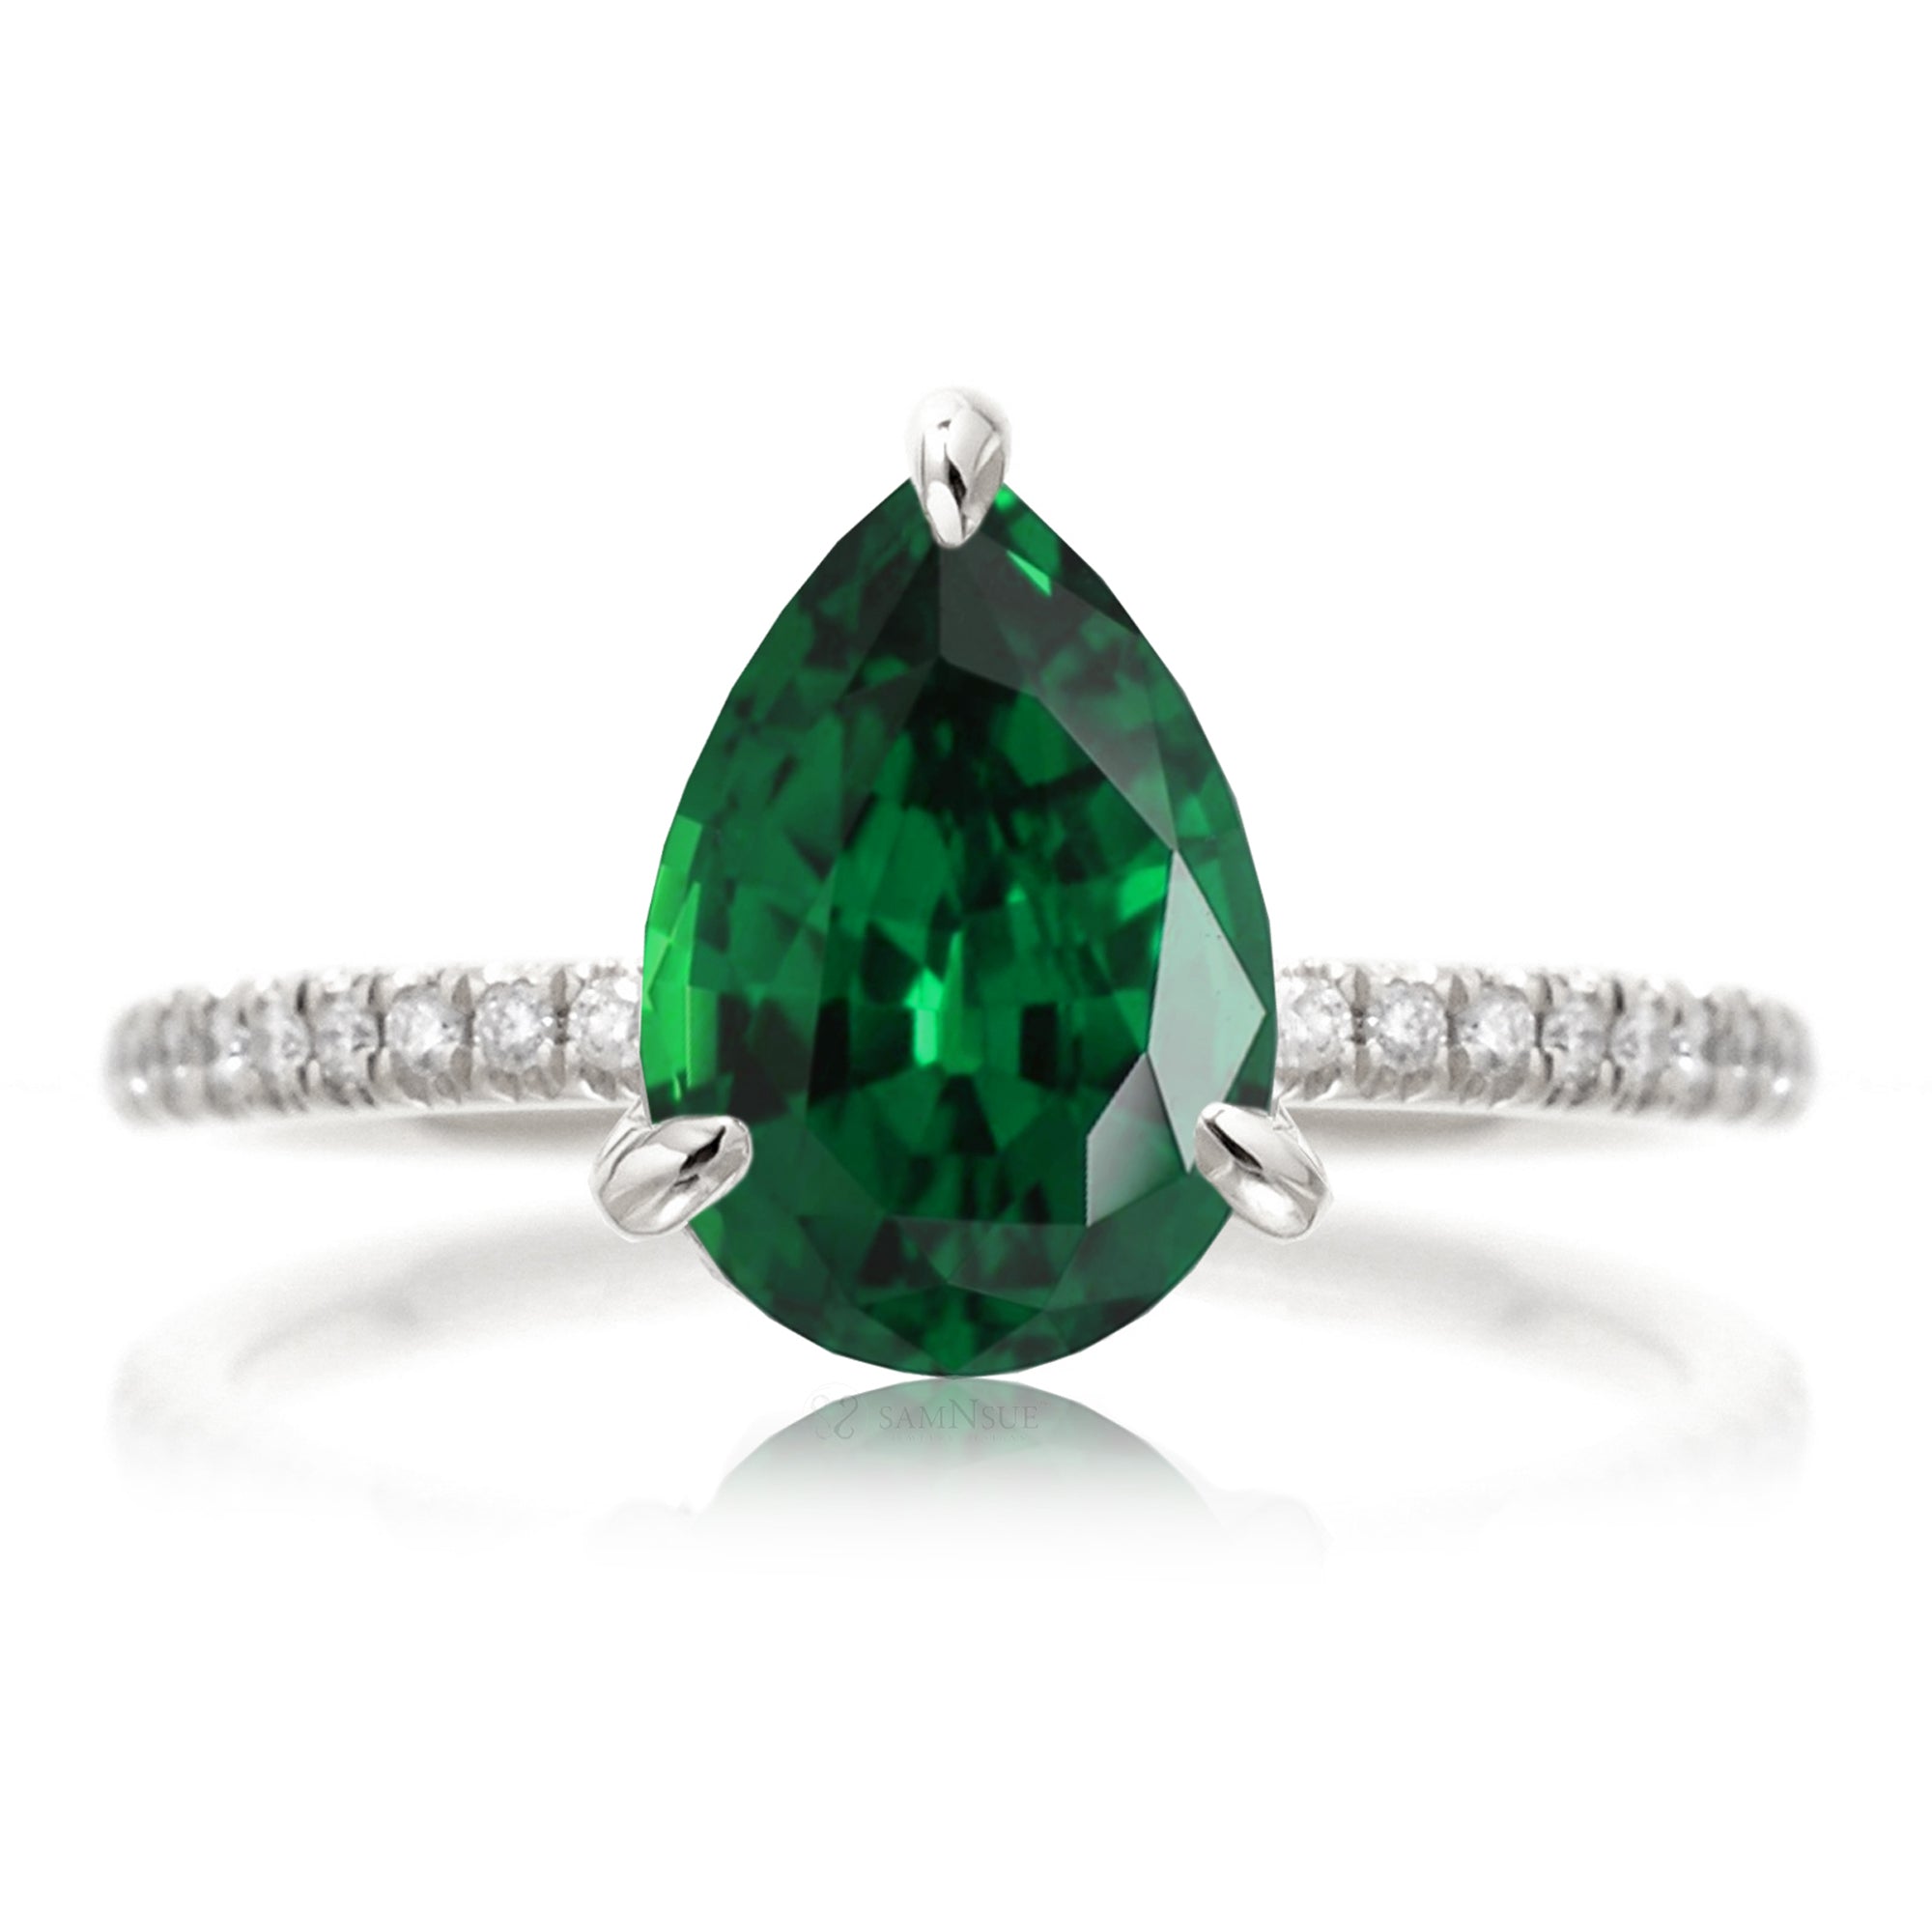 Pear green emerald diamond band engagement ring white gold - the Ava